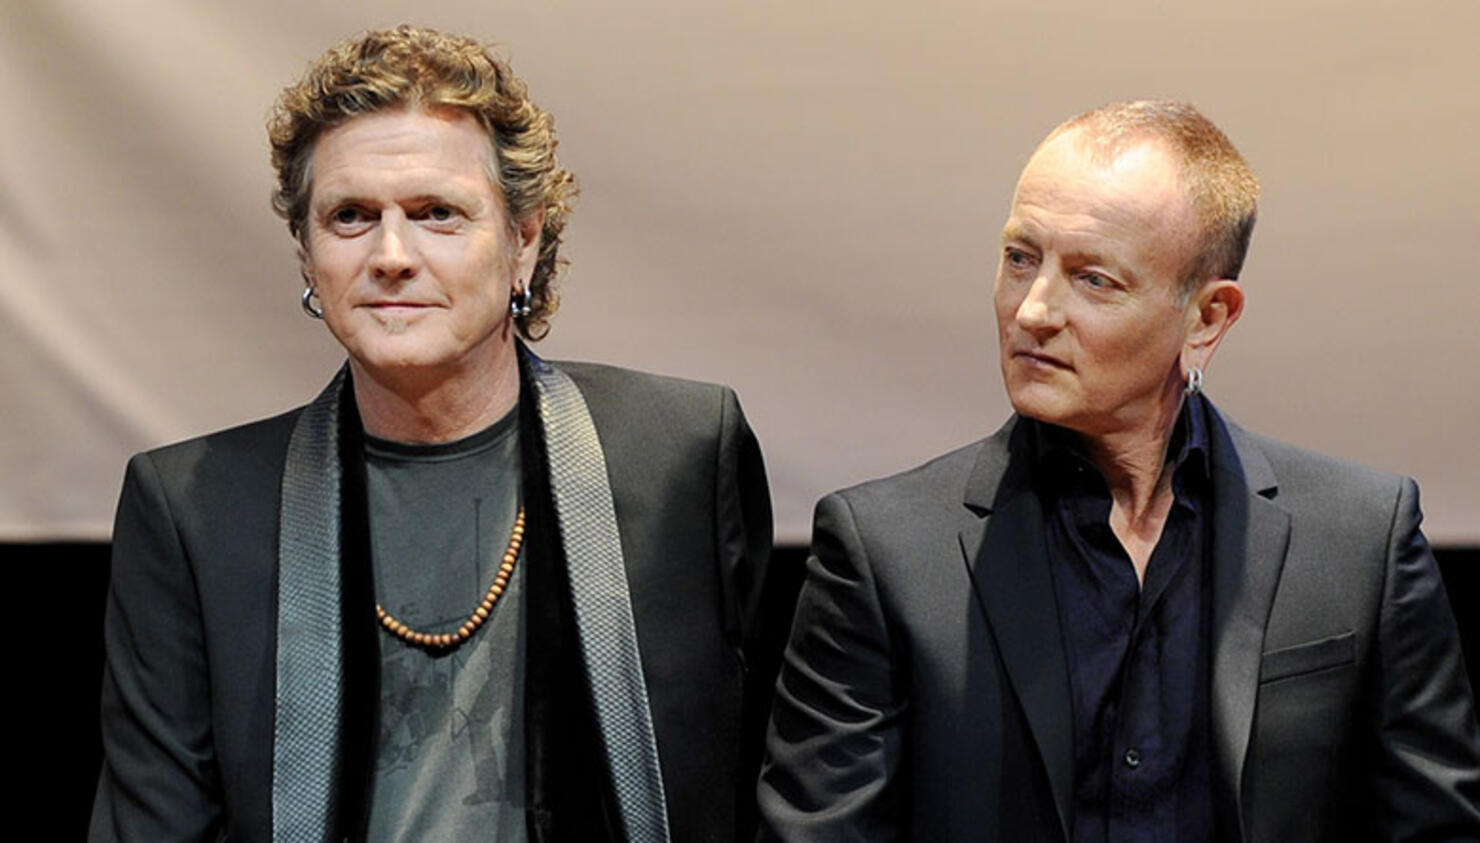 Def Leppard's Rick Allen Says Band Is "Back in the Saddle" With Phil Collen